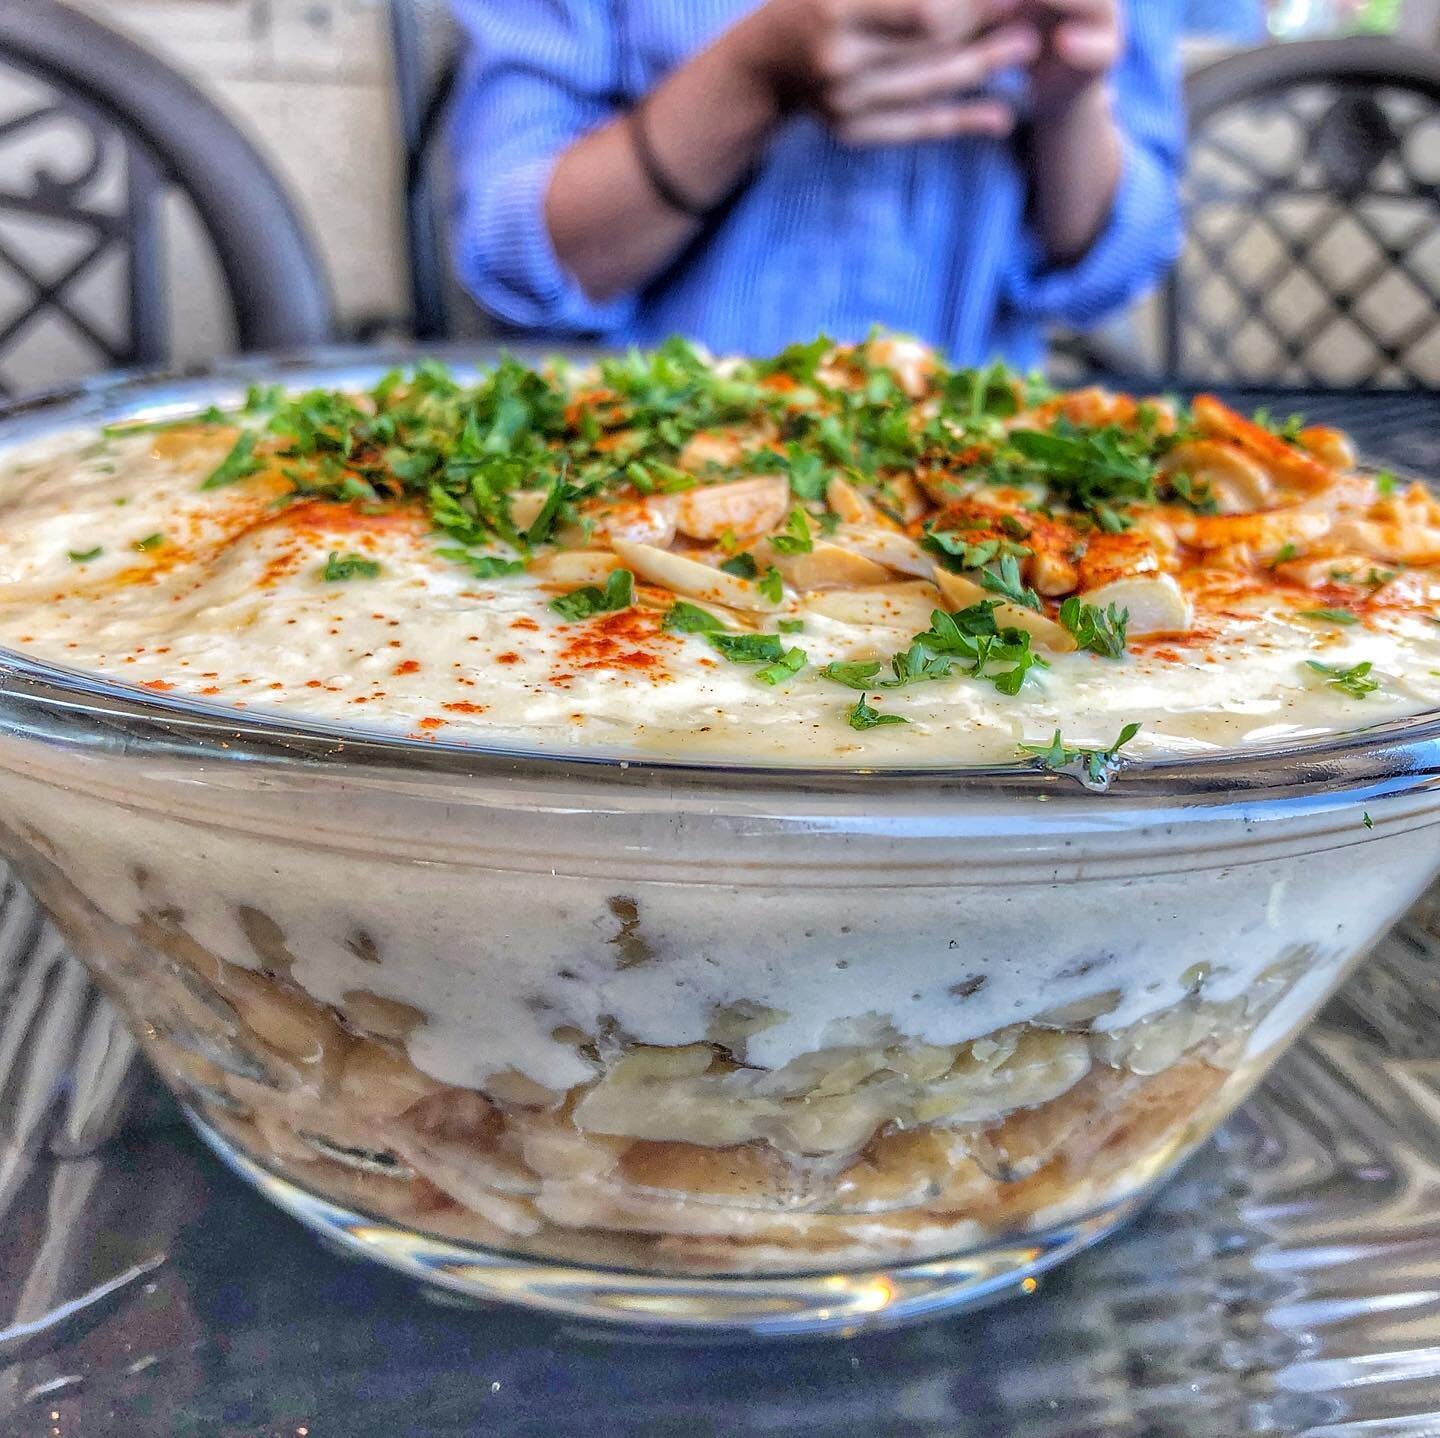 Fattet Hummus فتة حمص 🤩 consists of chickpeas, bread, and decorated with pine nuts.

📍 @kareemsfalafel 

&mdash;&mdash;&mdash;&mdash;&mdash;&mdash;&mdash;

#littlearabia #visitlittlearabia #ocfoodies  #foodblogger #anaheim #oclife #lafoodie  #Visit